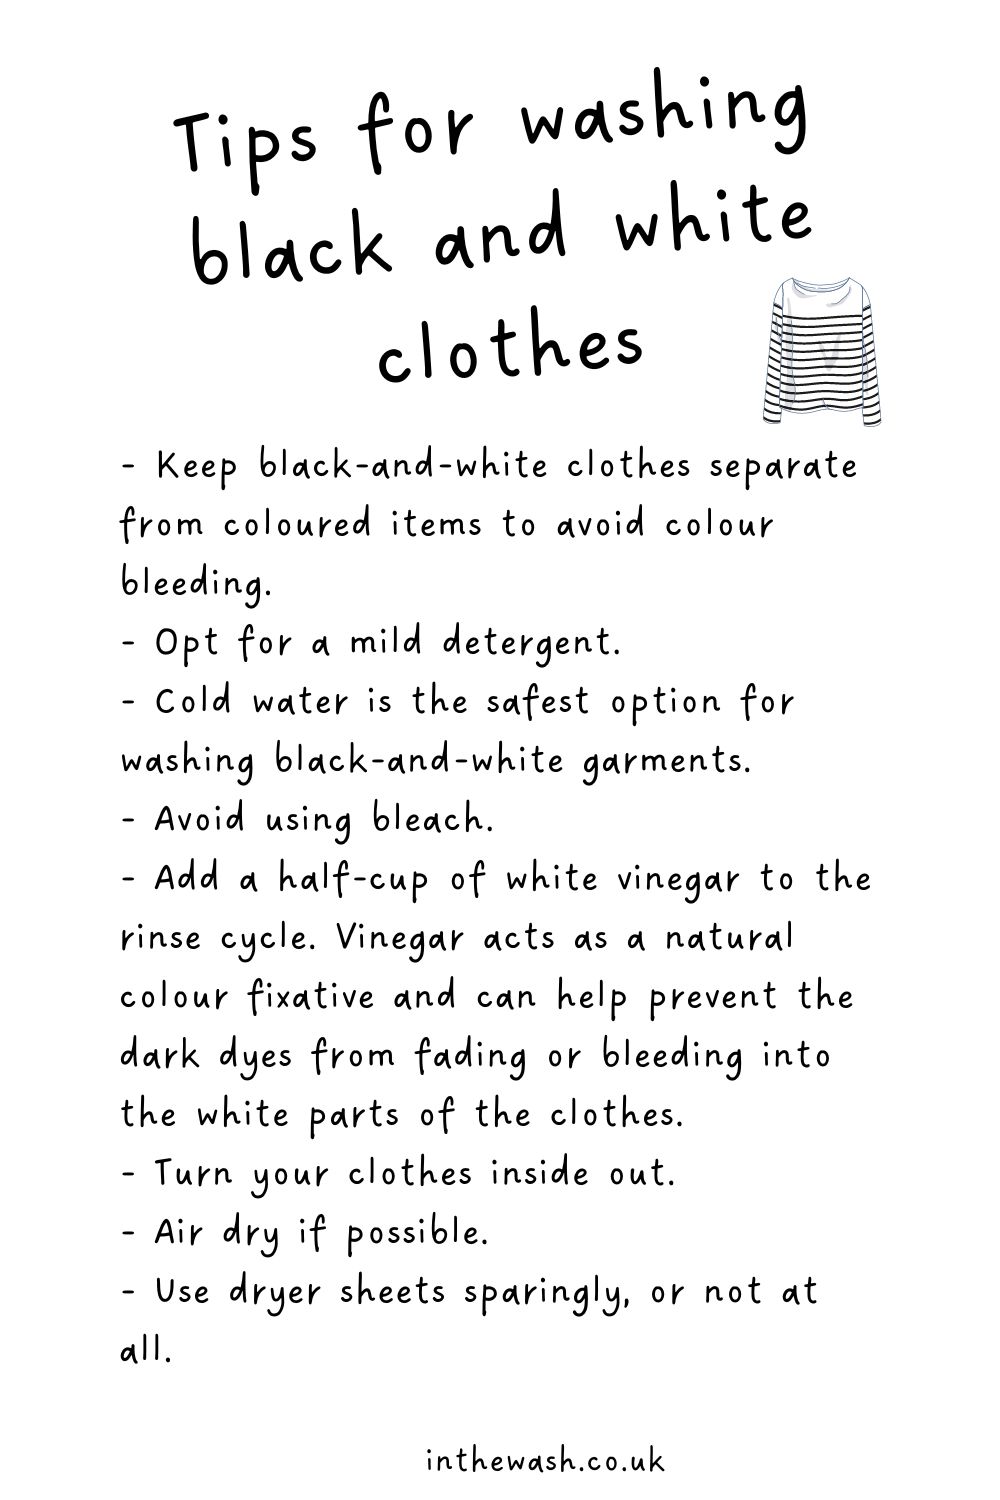 Tips for washing black and white clothes